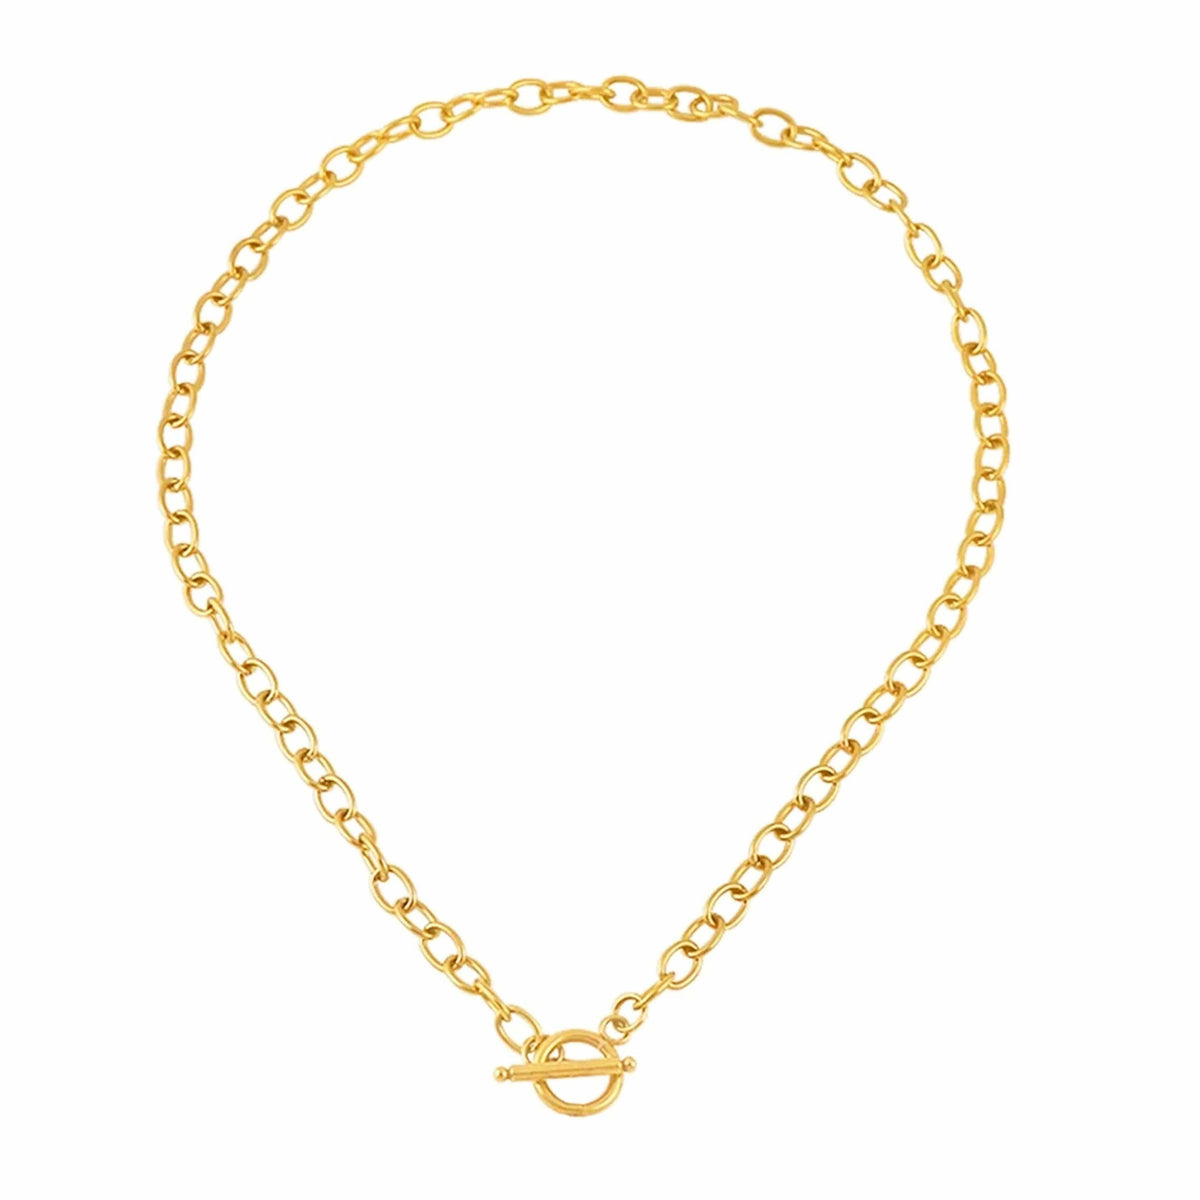 BohoMoon Stainless Steel Maisie TBar Necklace Gold